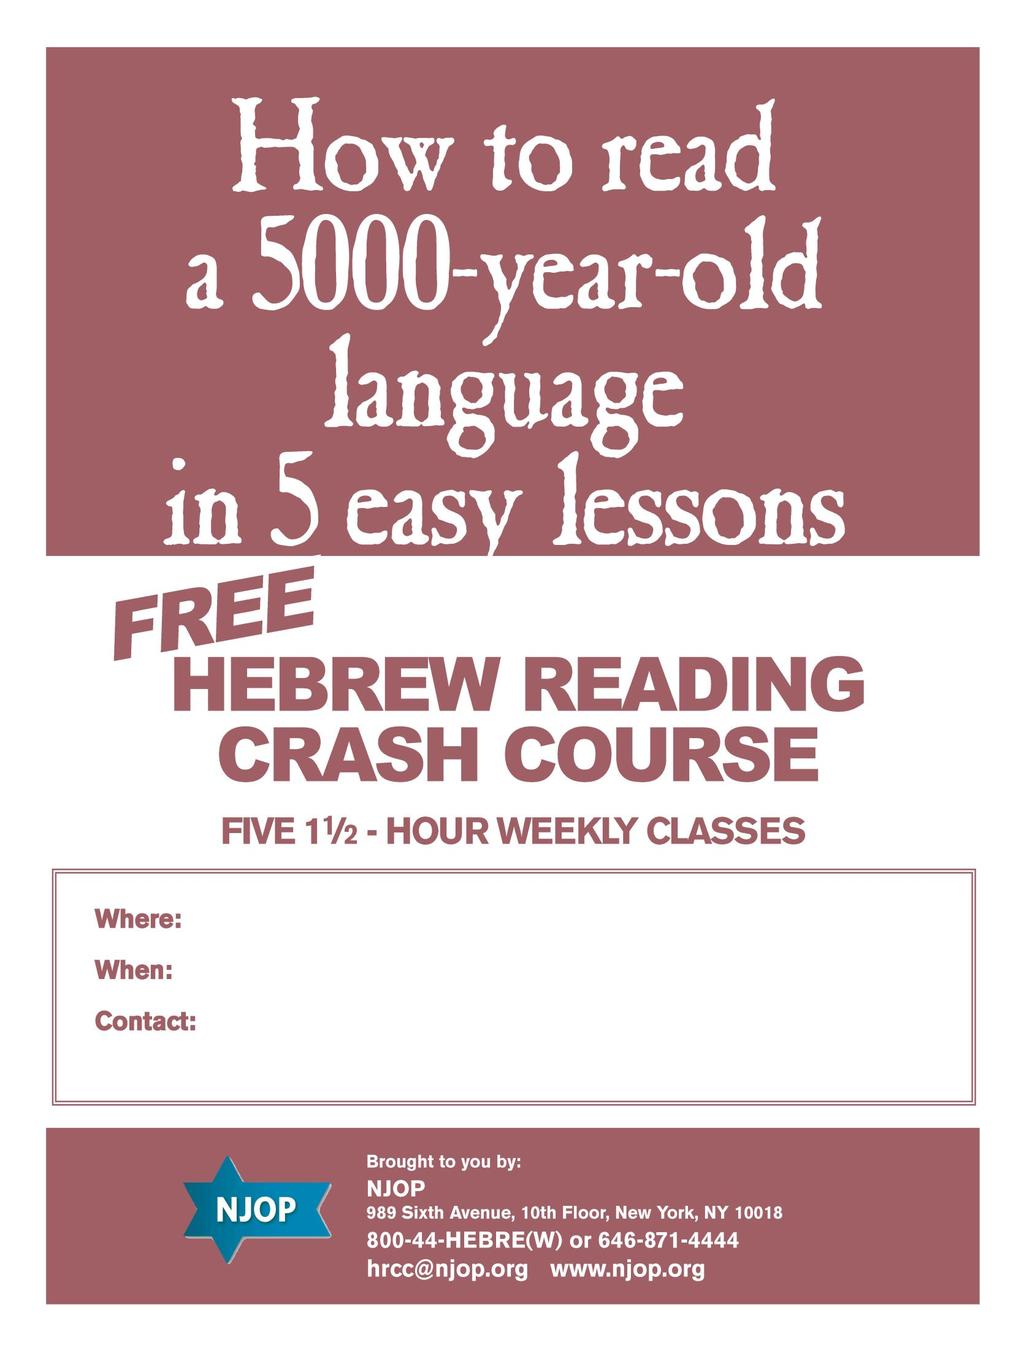 Where: Westmount Shul and Learning Centre- 10 Disera Dr, Unit 250 Thornhill When: Starts Wednesday, April